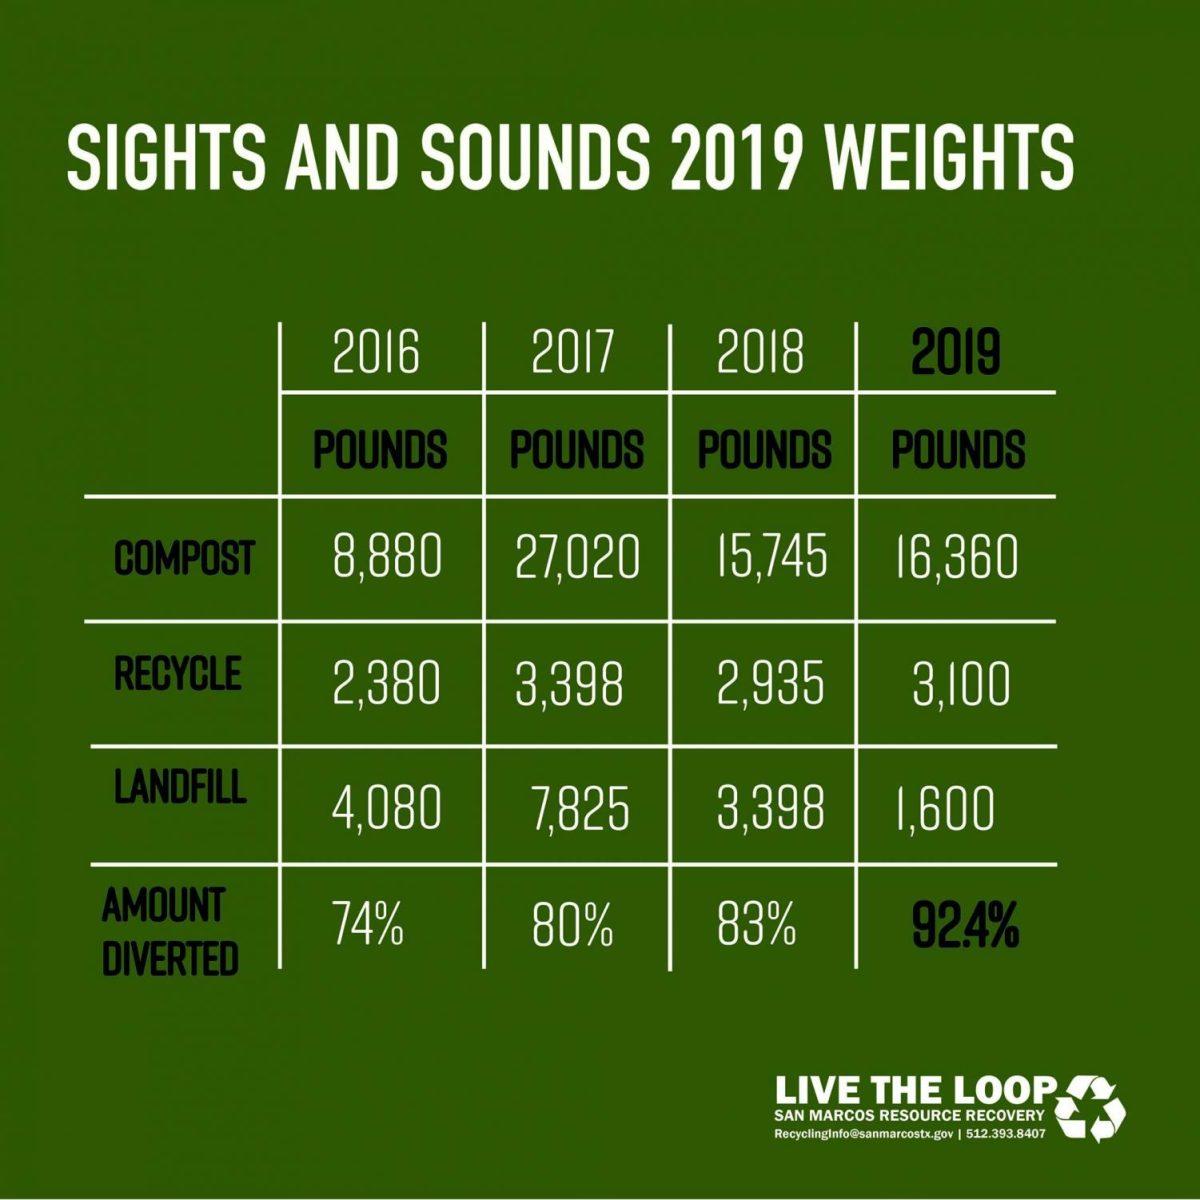 Courtesy of the City of San Marcos.Graph showing weights of byproduct produced by Sights and Sounds over the last four years.